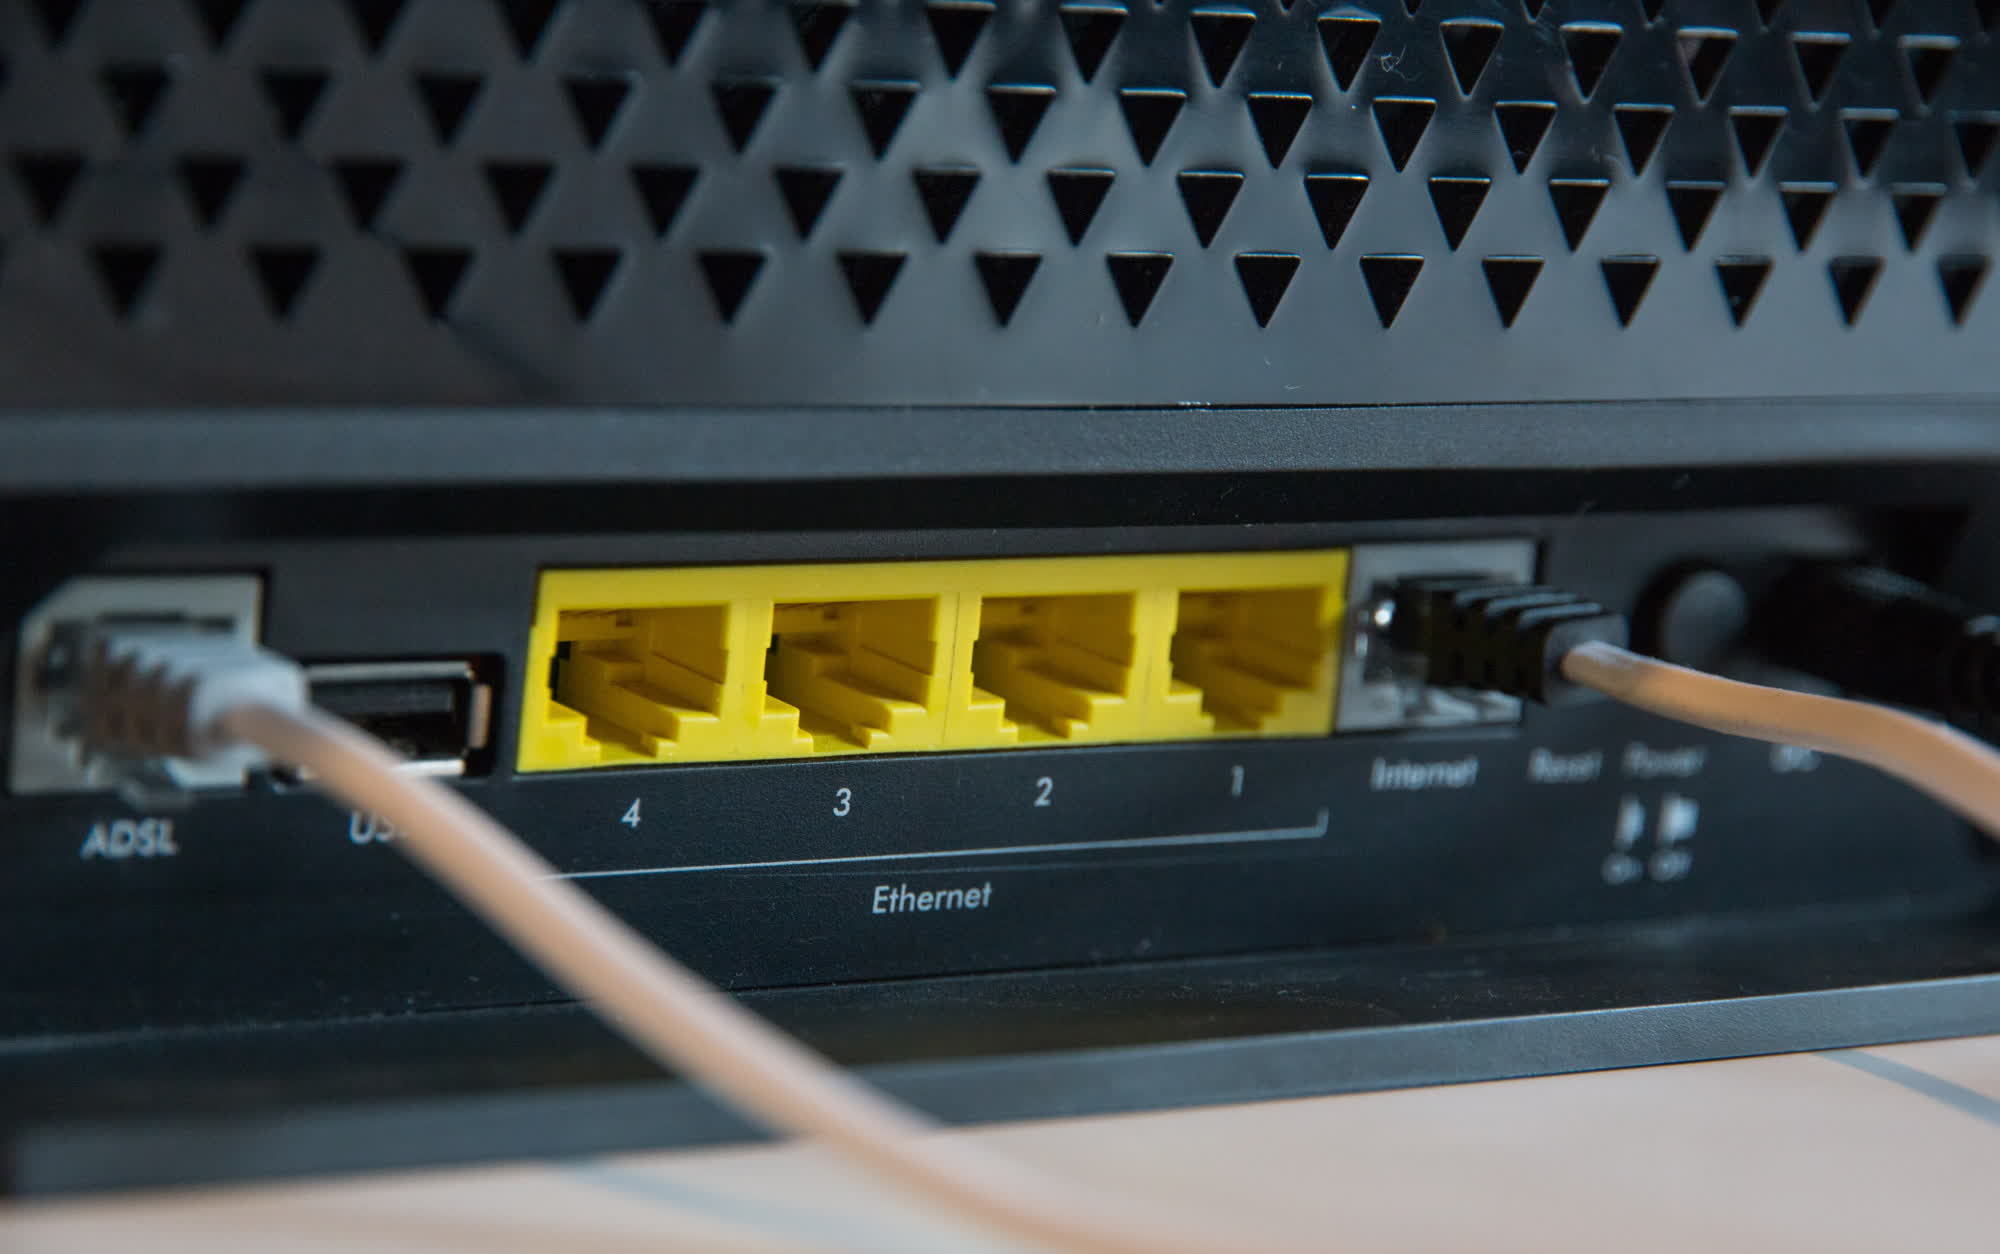 PSA: Replace vulnerable D-Link routers as soon as possible, says CISA